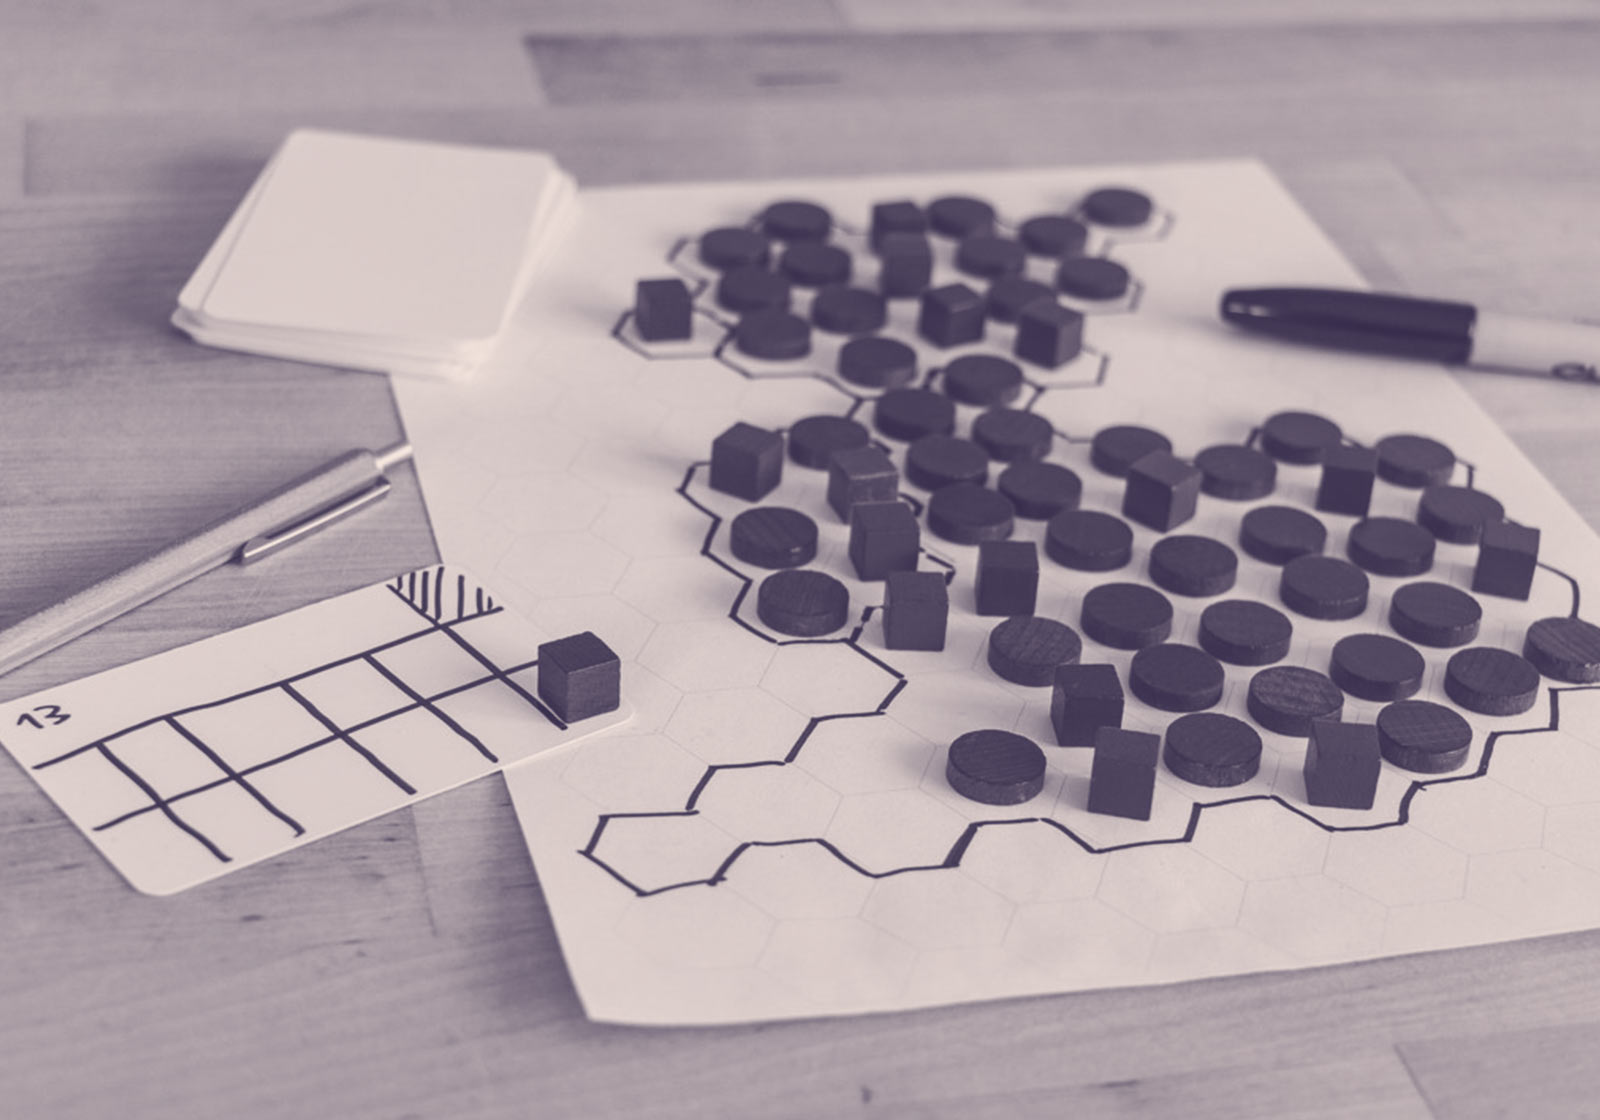 A board game prototype